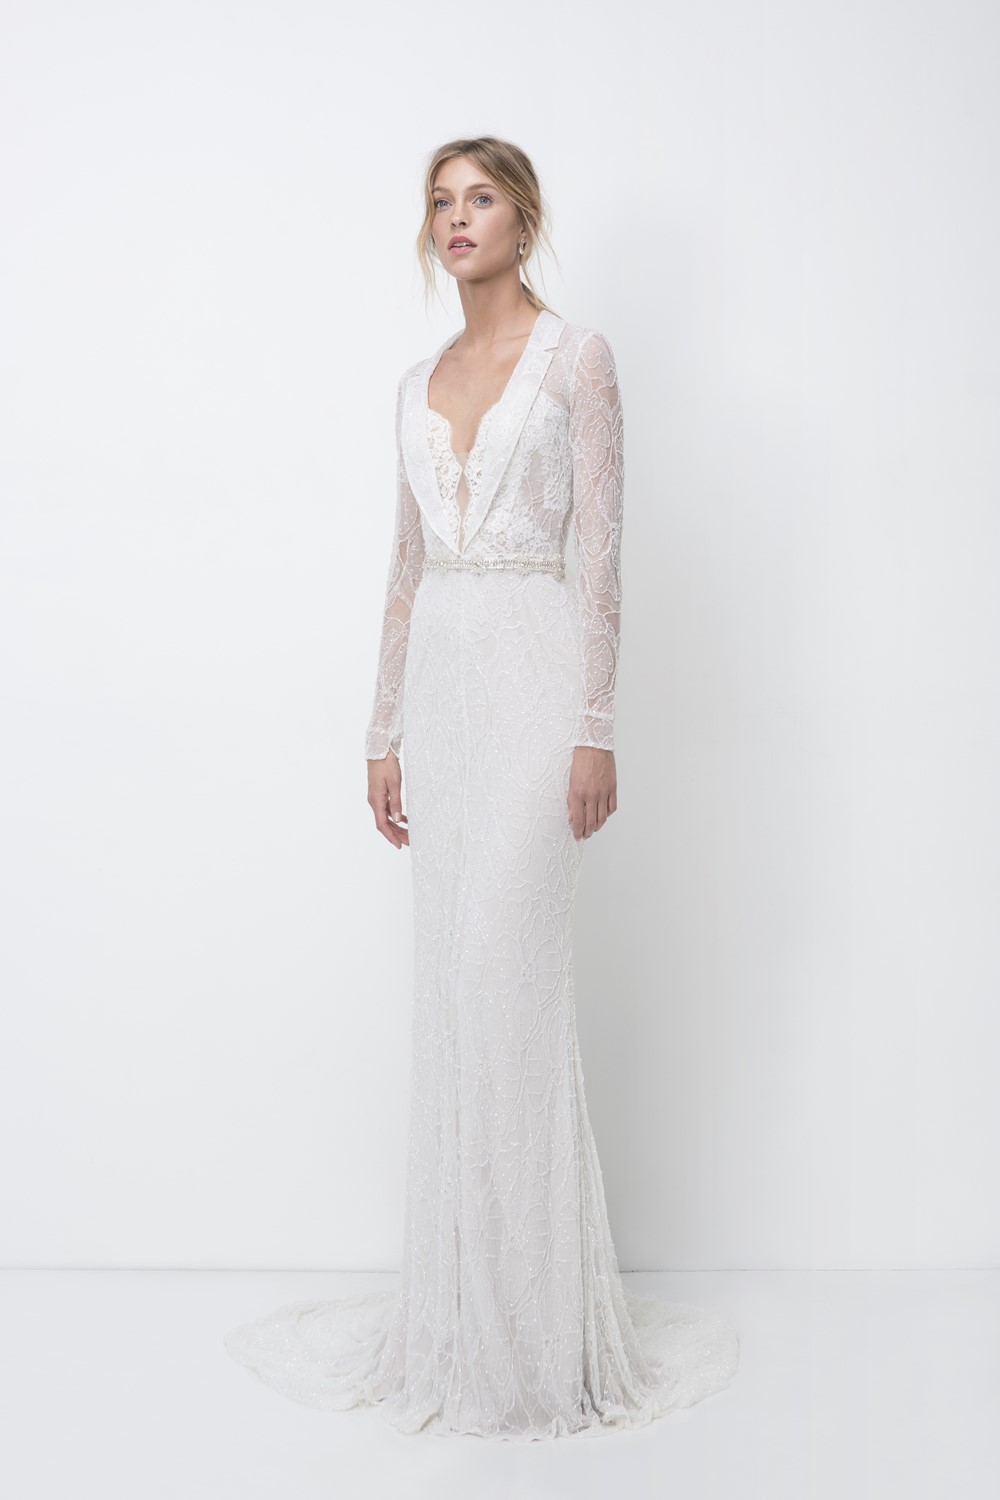 Leonora Wedding Dress from Lihi Hod's 2018 Bridal Collection